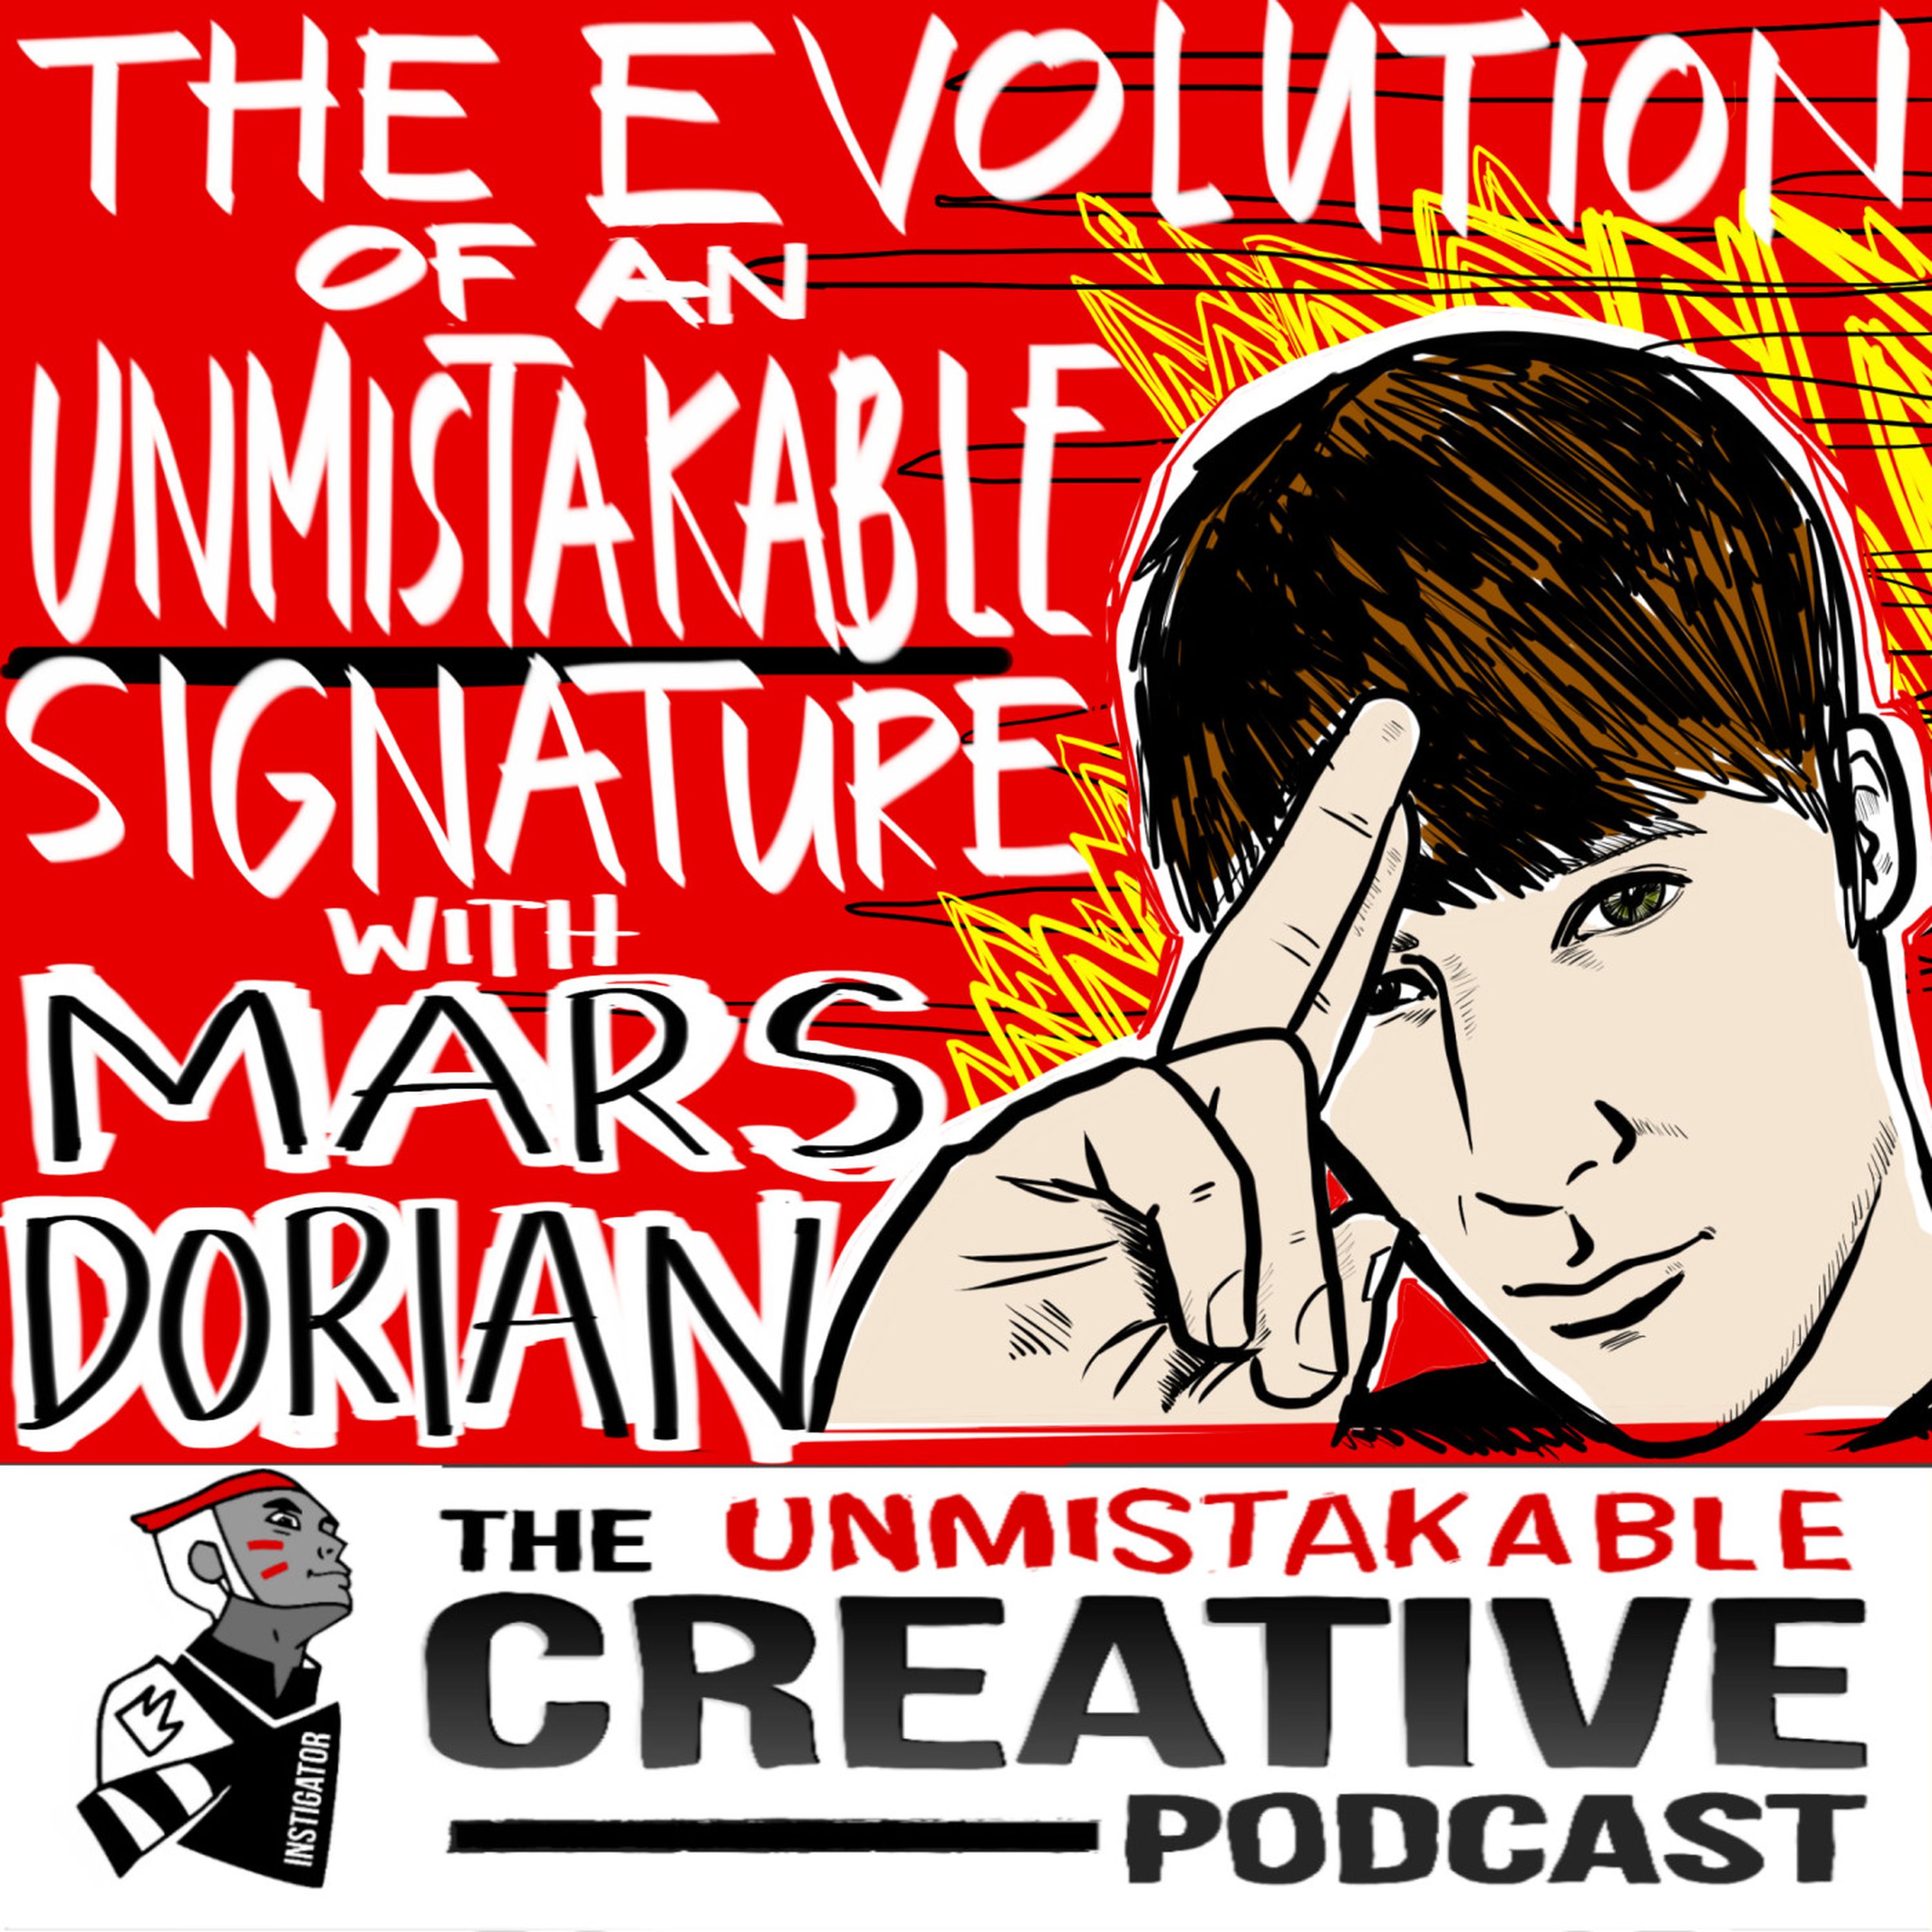 The Evolution of an Unmistakable Signature with Mars Dorian Image